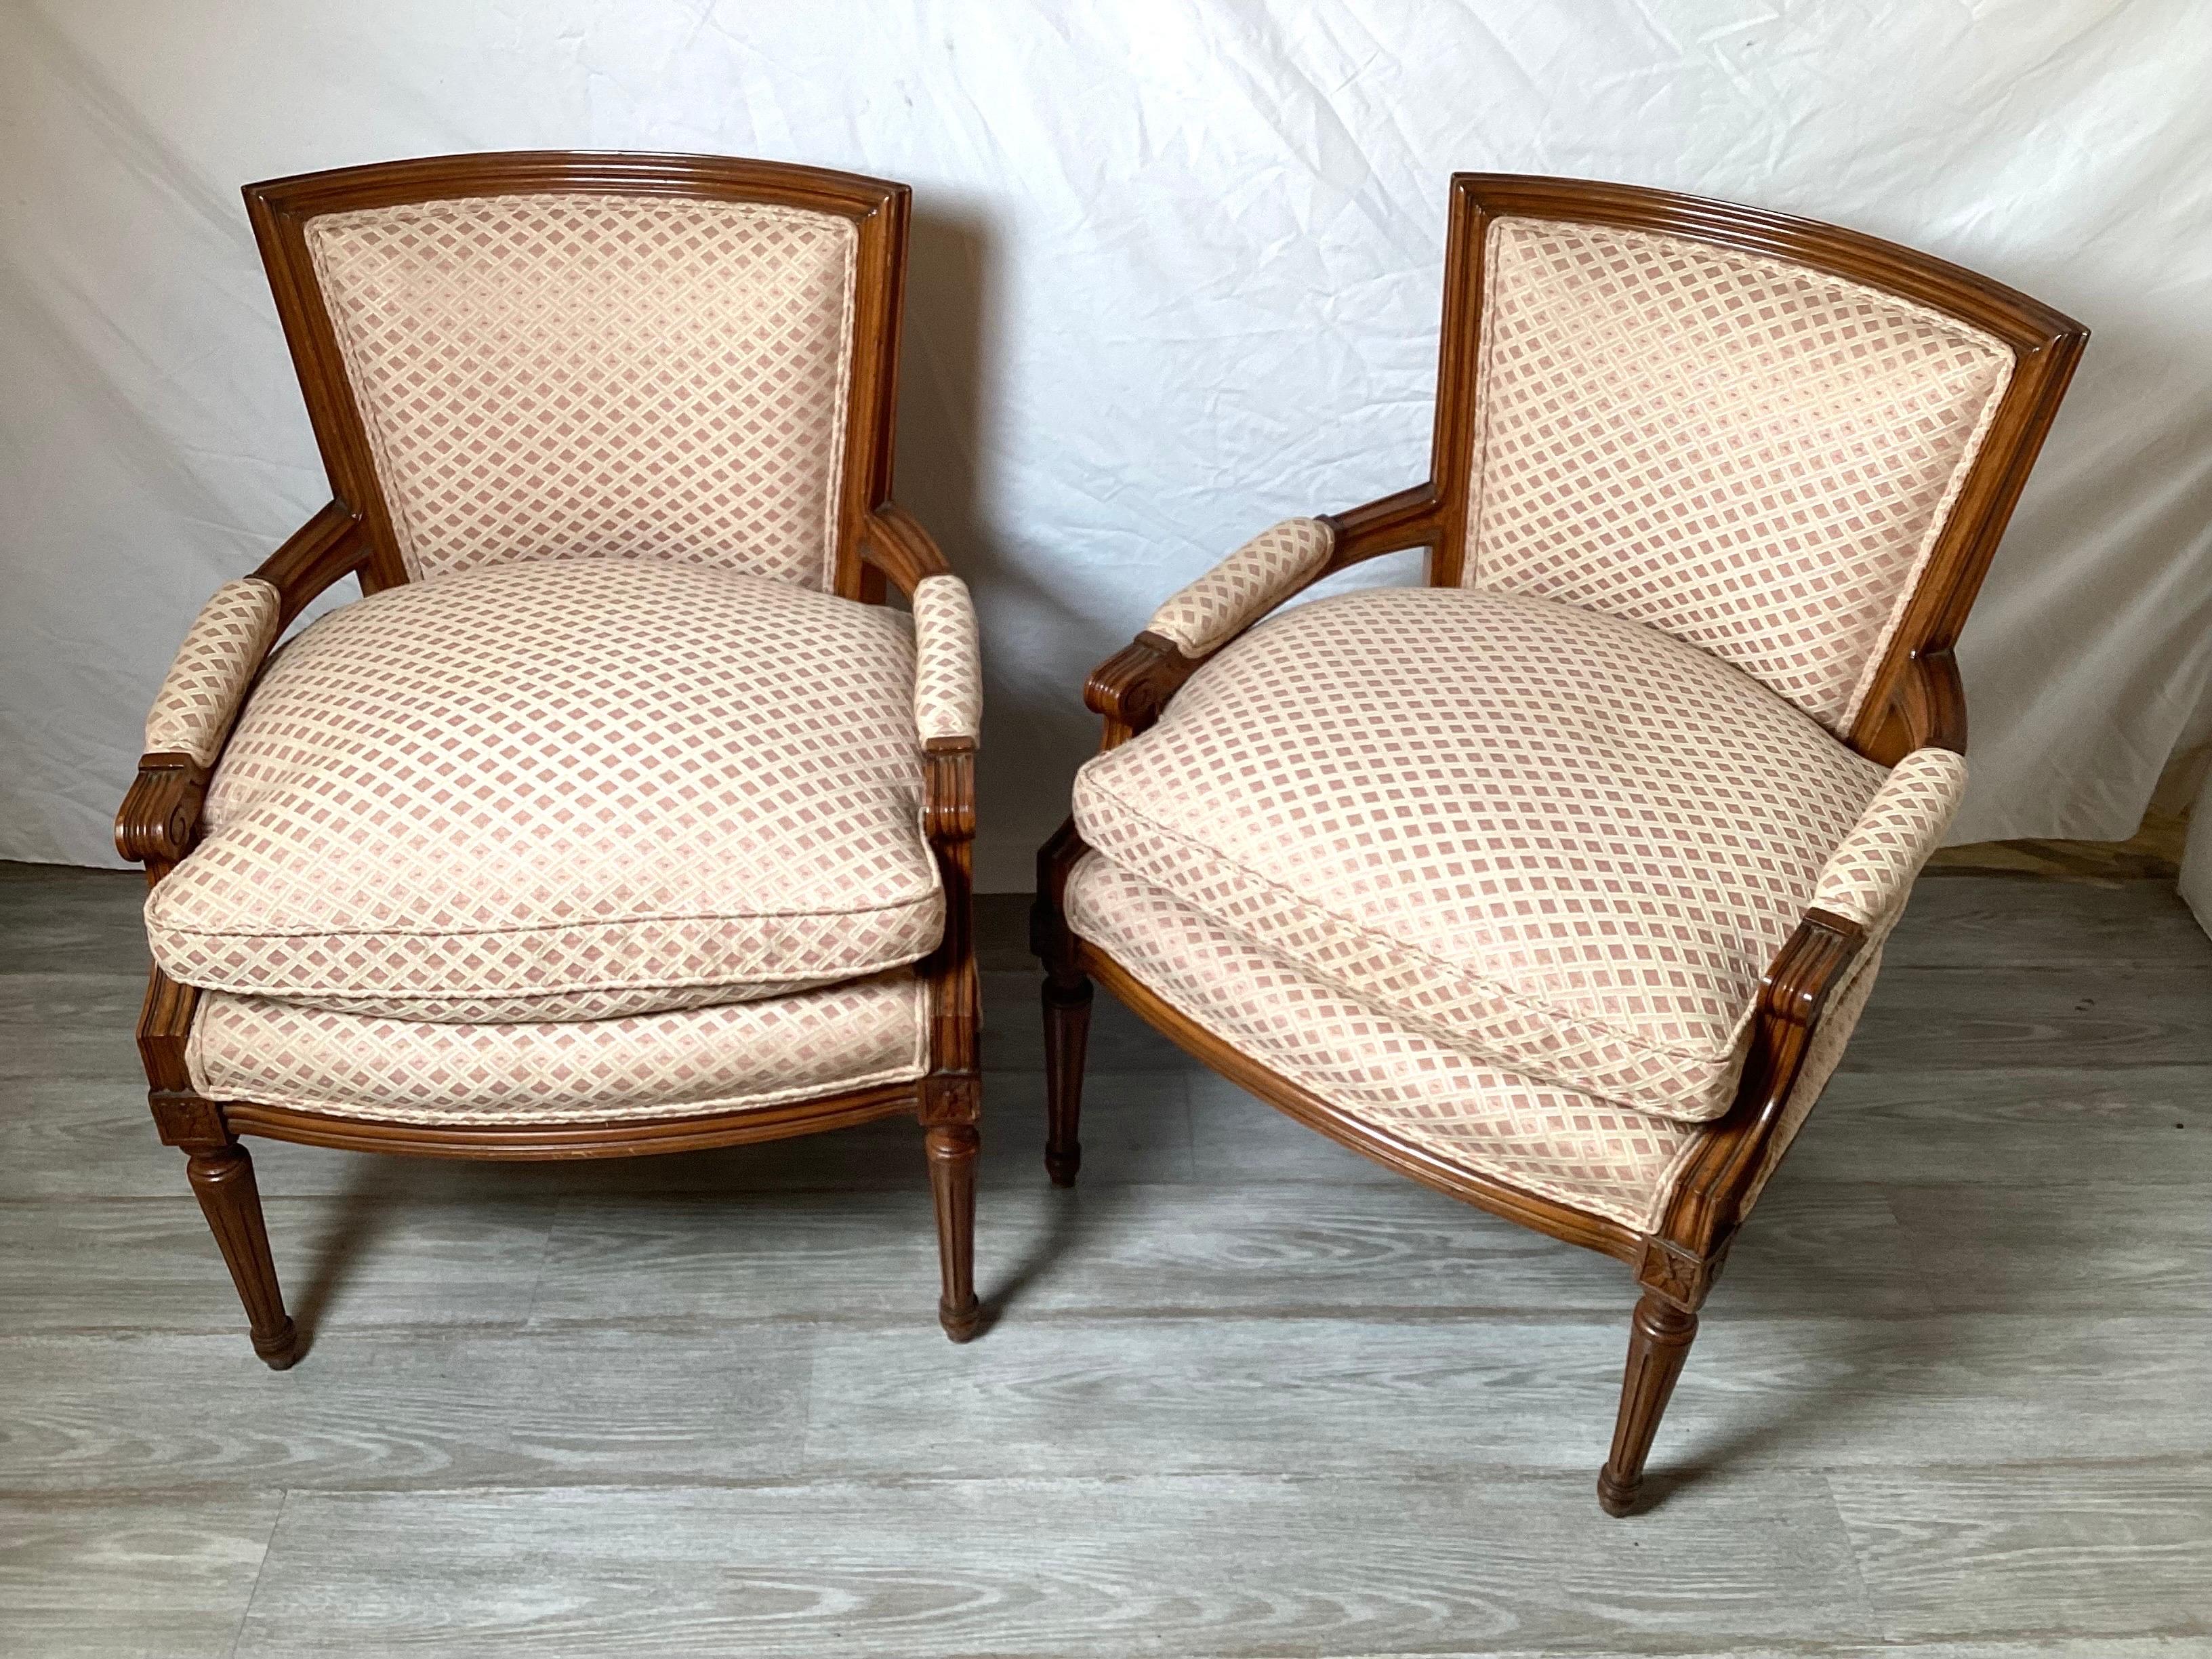 A pair of walnut framed Louis XVI style arm chairs in a blush and cream lattice pattern damask fabric. The overfilled down and feather seats with squared backs and tapering legs.